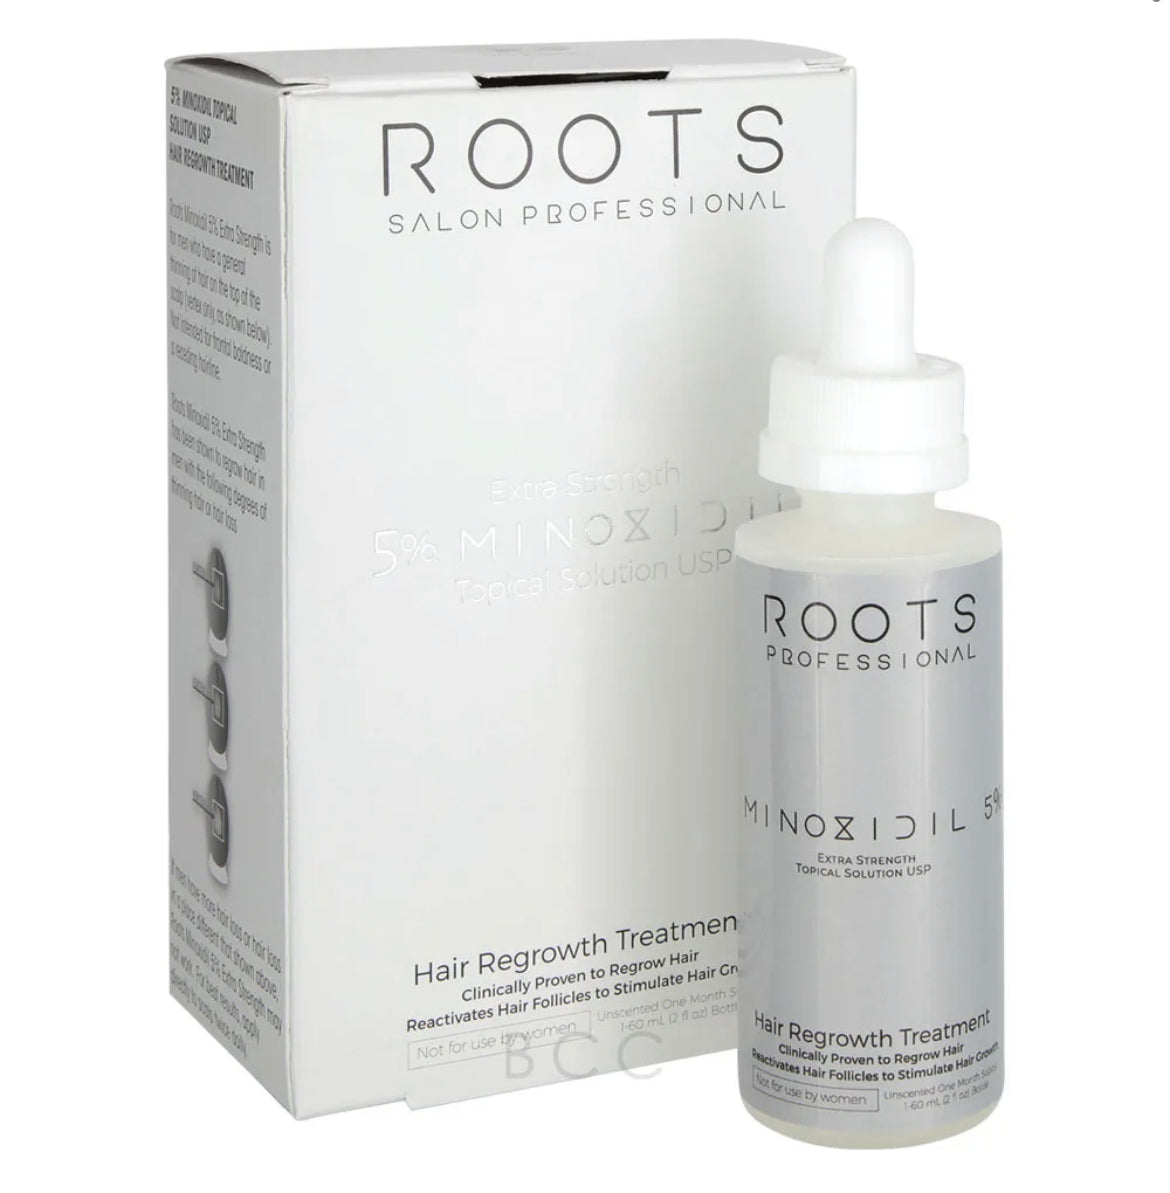 ROOTS Hair Regrowth treatment